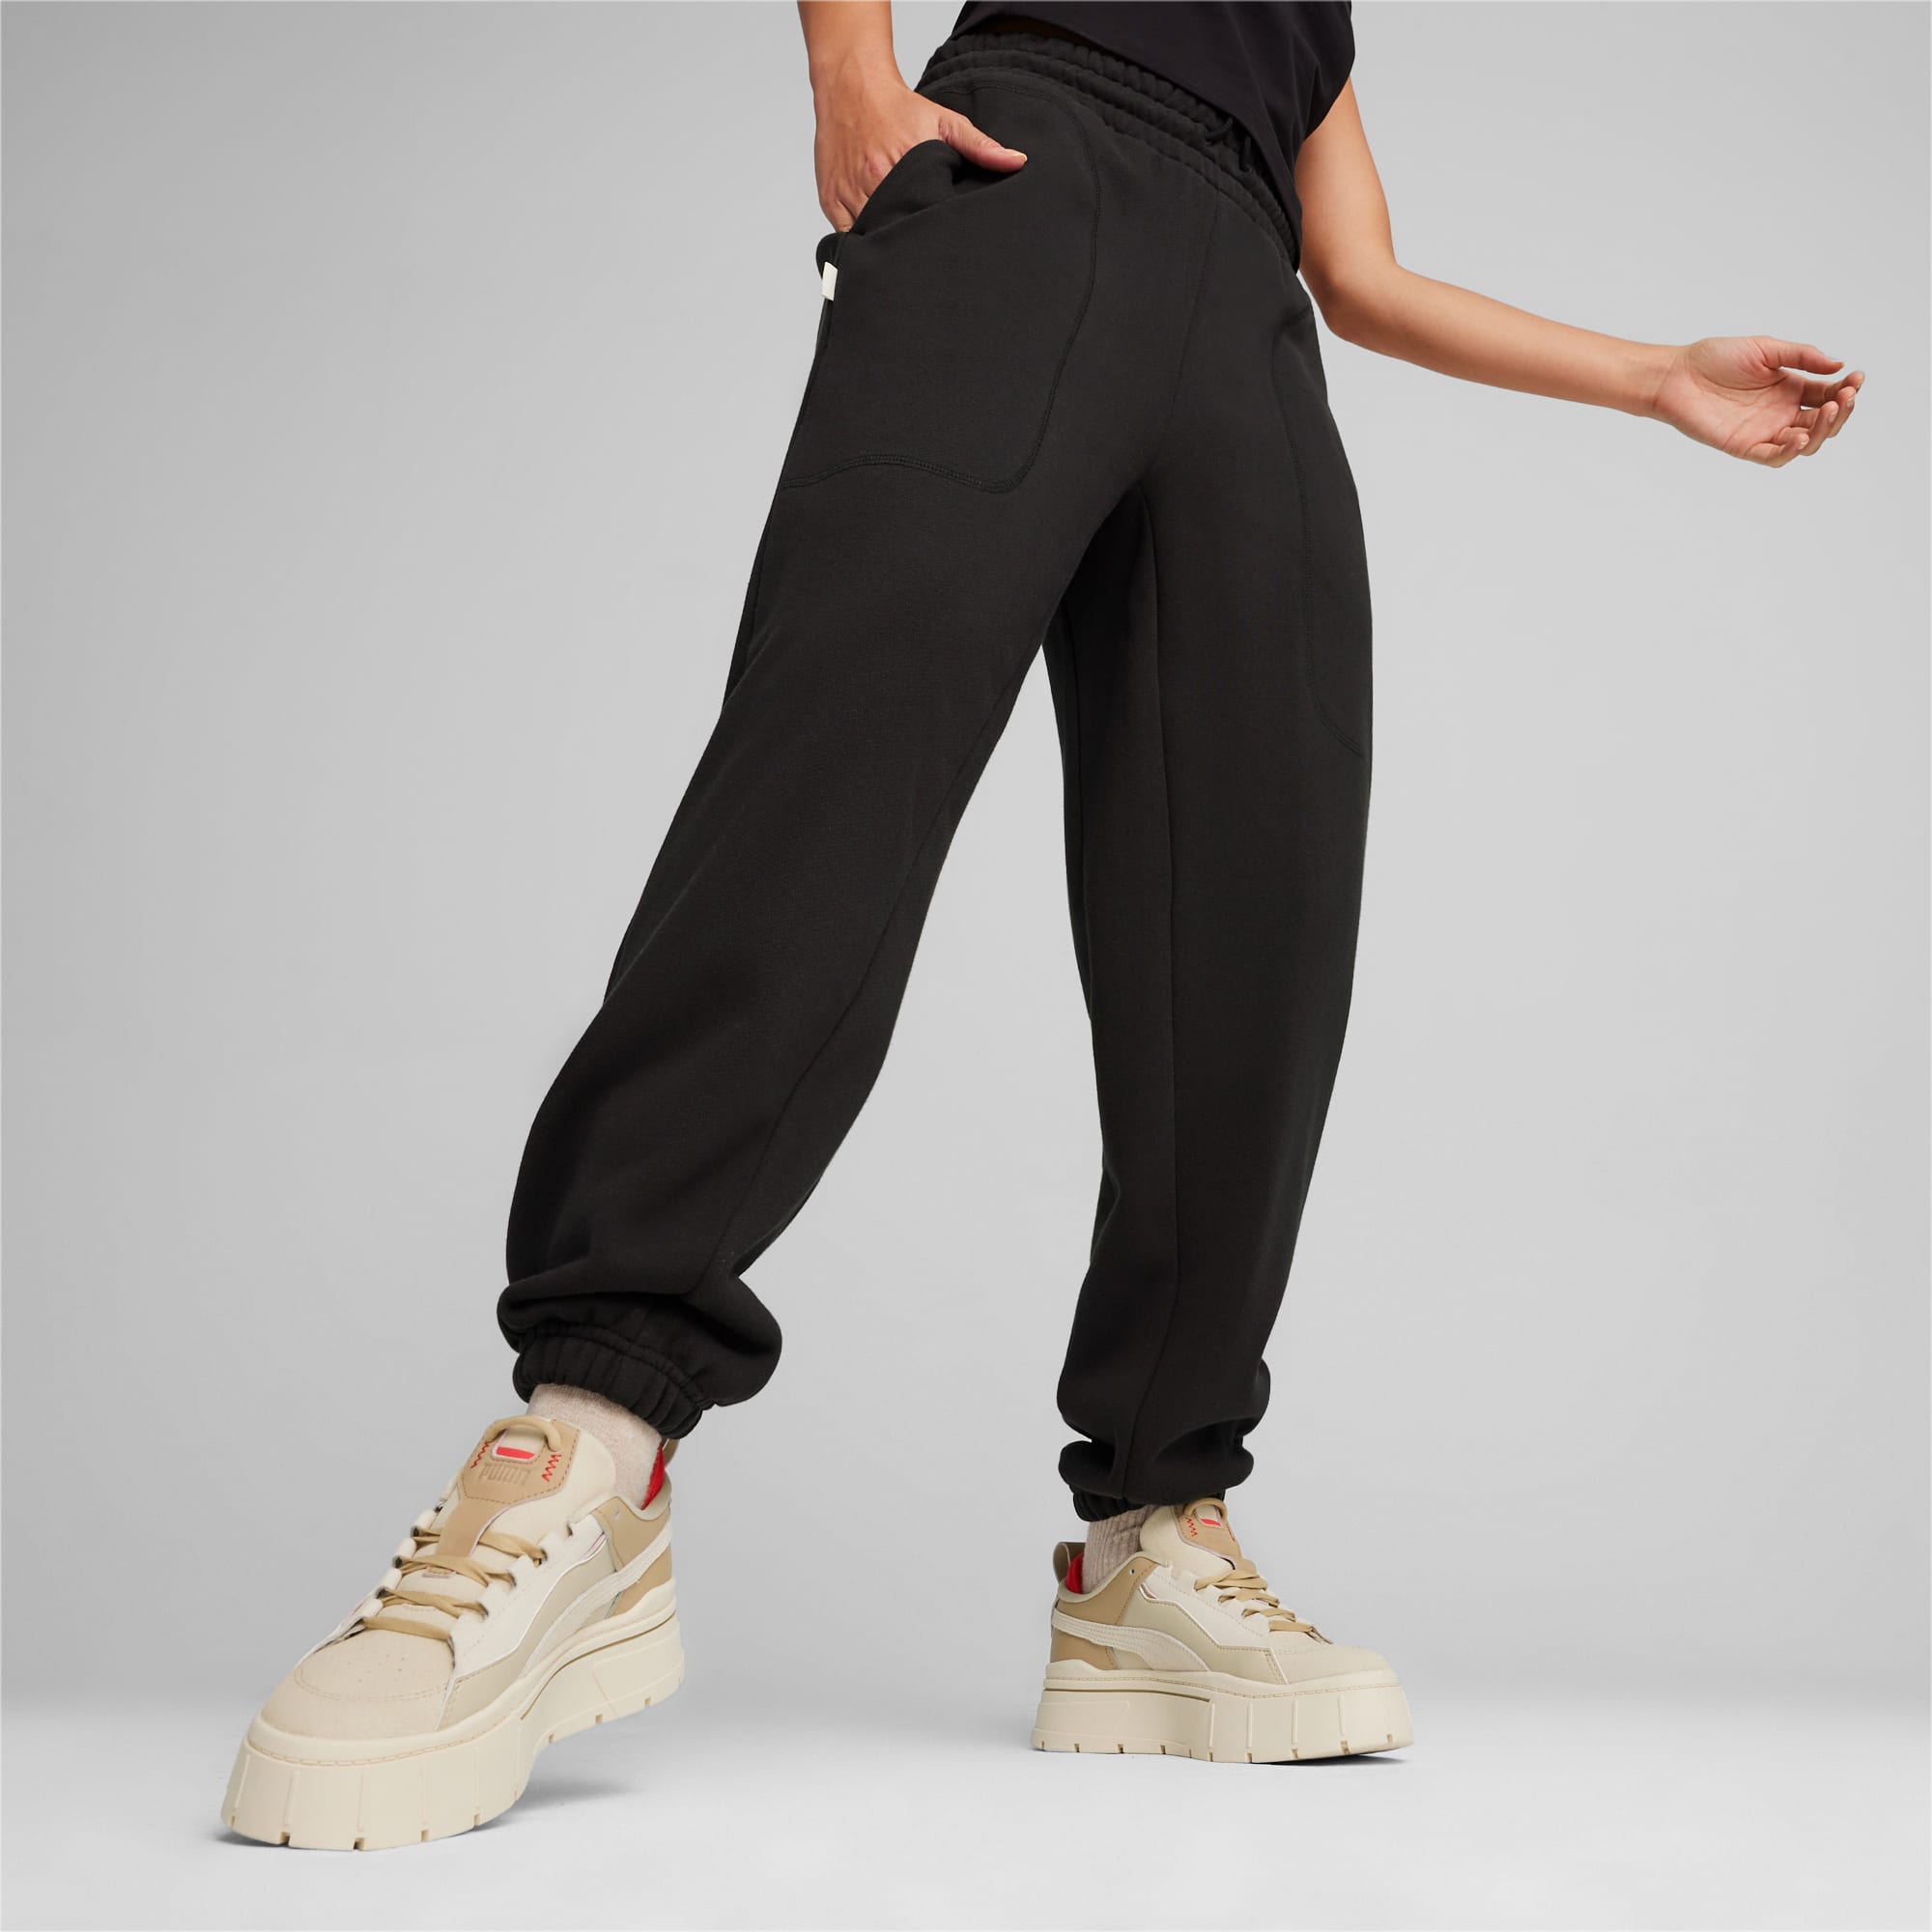 INFUSE Women's Relaxed Sweatpants